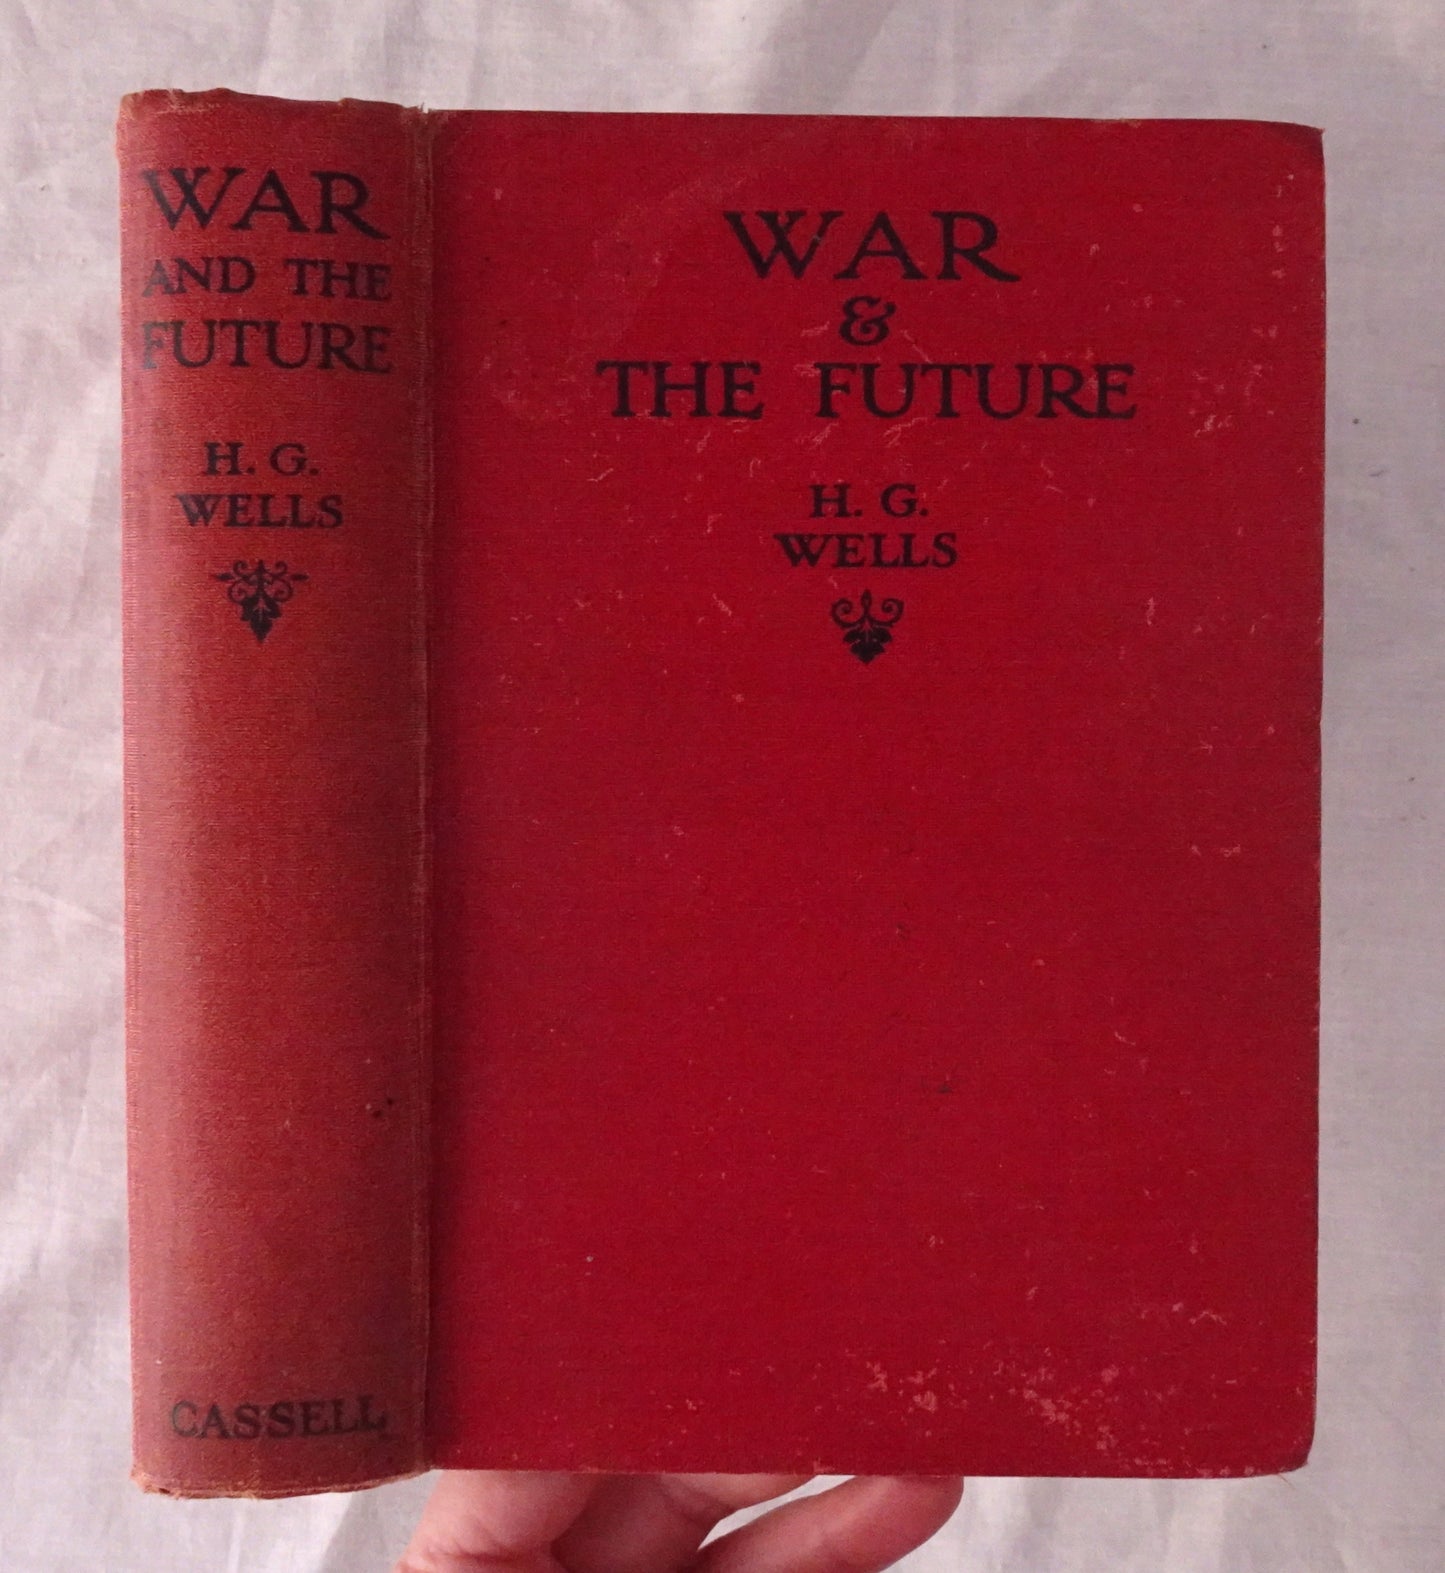 War and the Future  Italy, France and Britain at War  by H. G. Wells